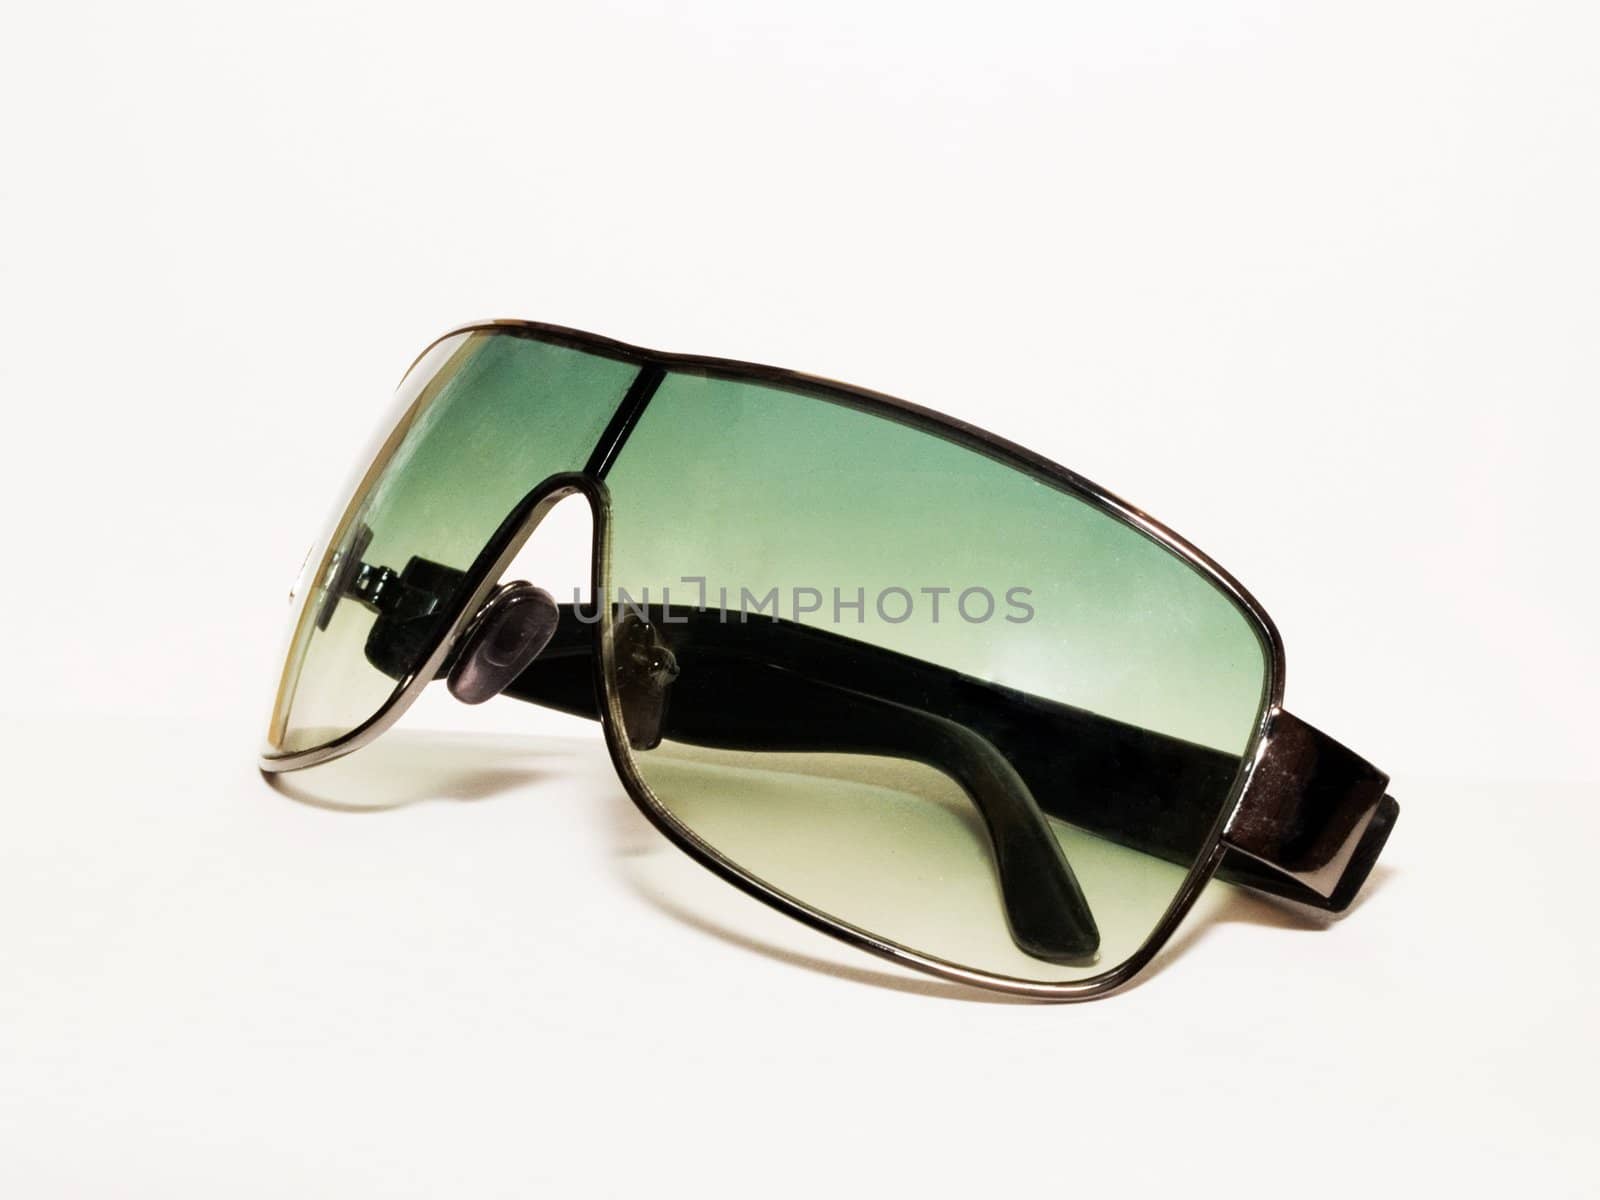 Green sunglasses isolated on white